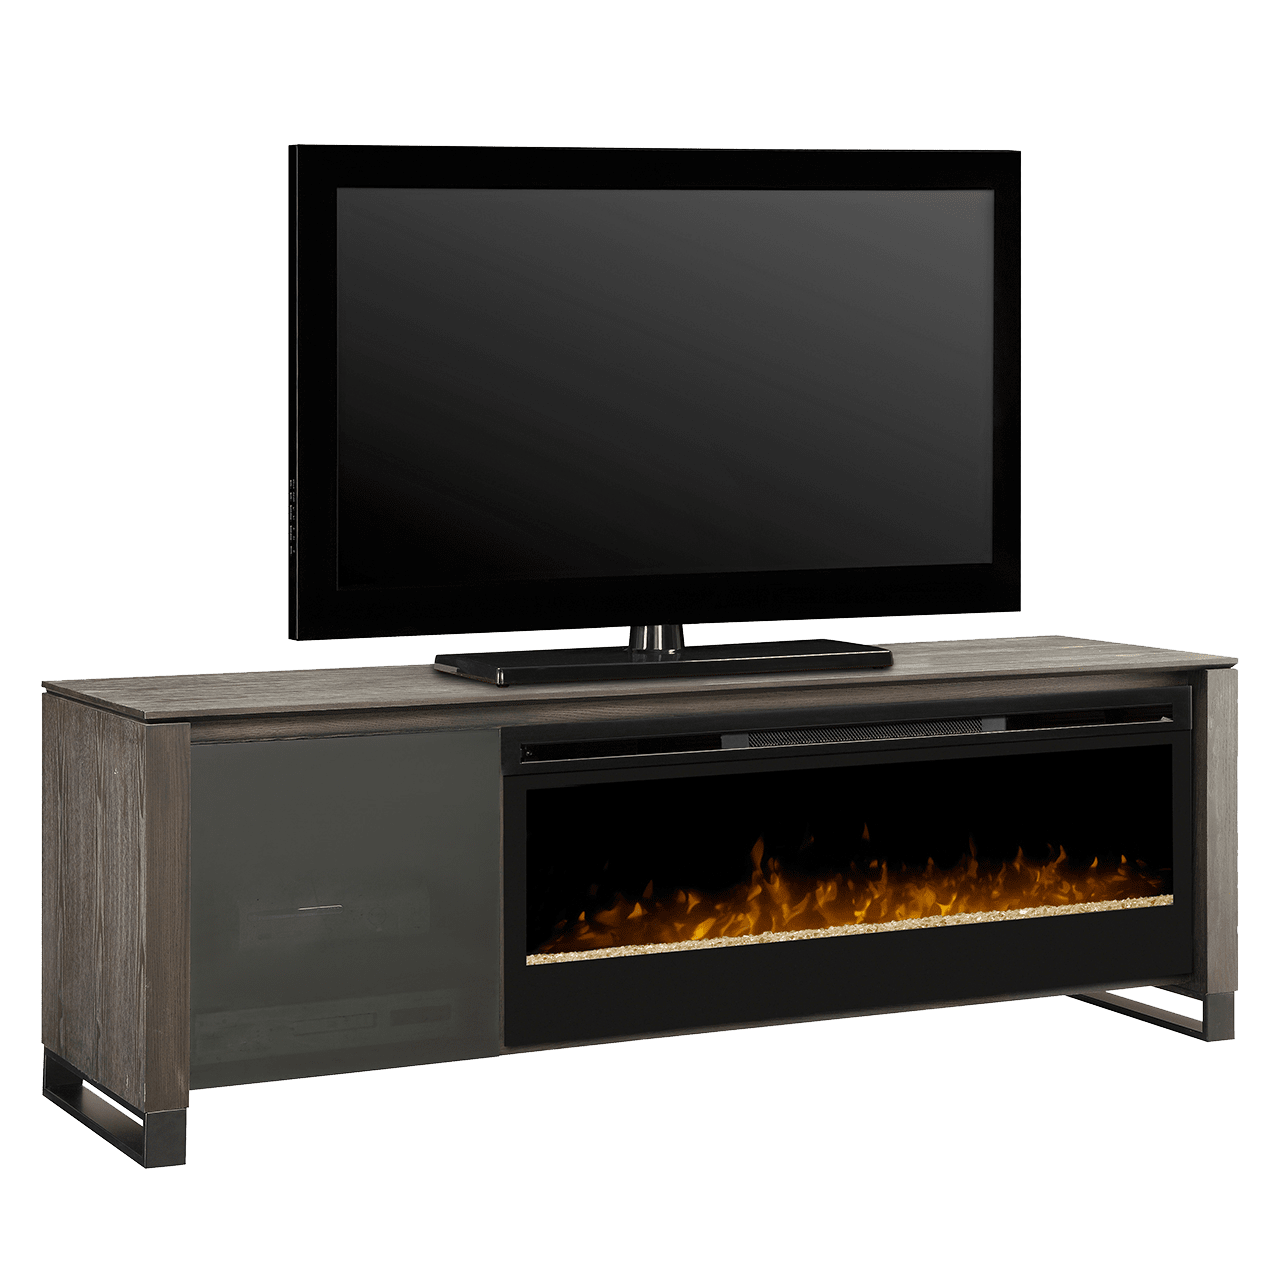 The Dimplex Howden Media Console Electric Fireplace is the ideal focal point of any in-home theatre or living room. Free Shipping at Sylvane.